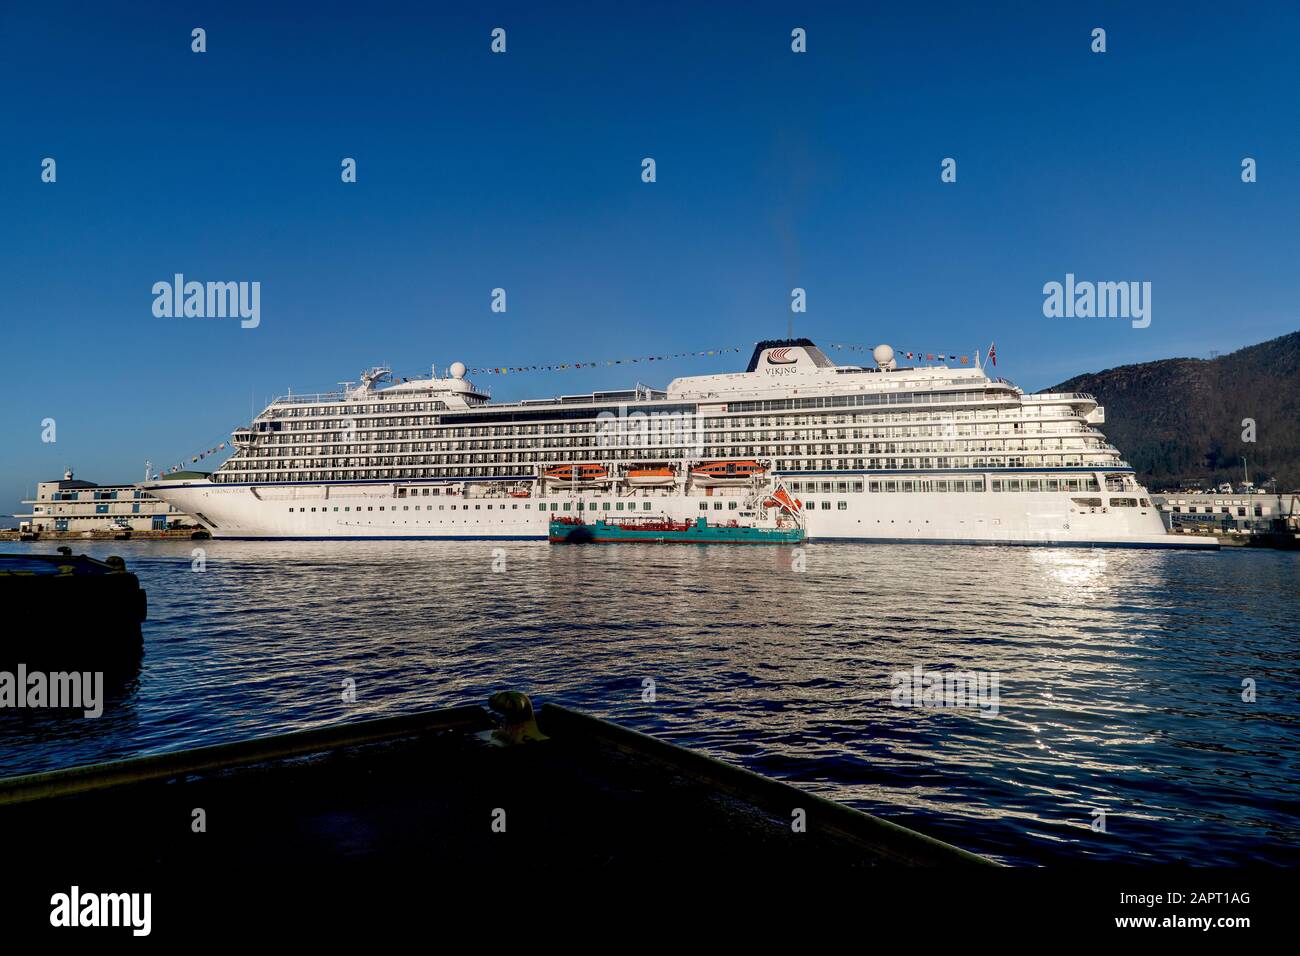 Cruise ship Viking Star at Skolten quay in port of Bergen, Norway. Tanker vessel Oslo Tank alongside the large cruise ship. Stock Photo